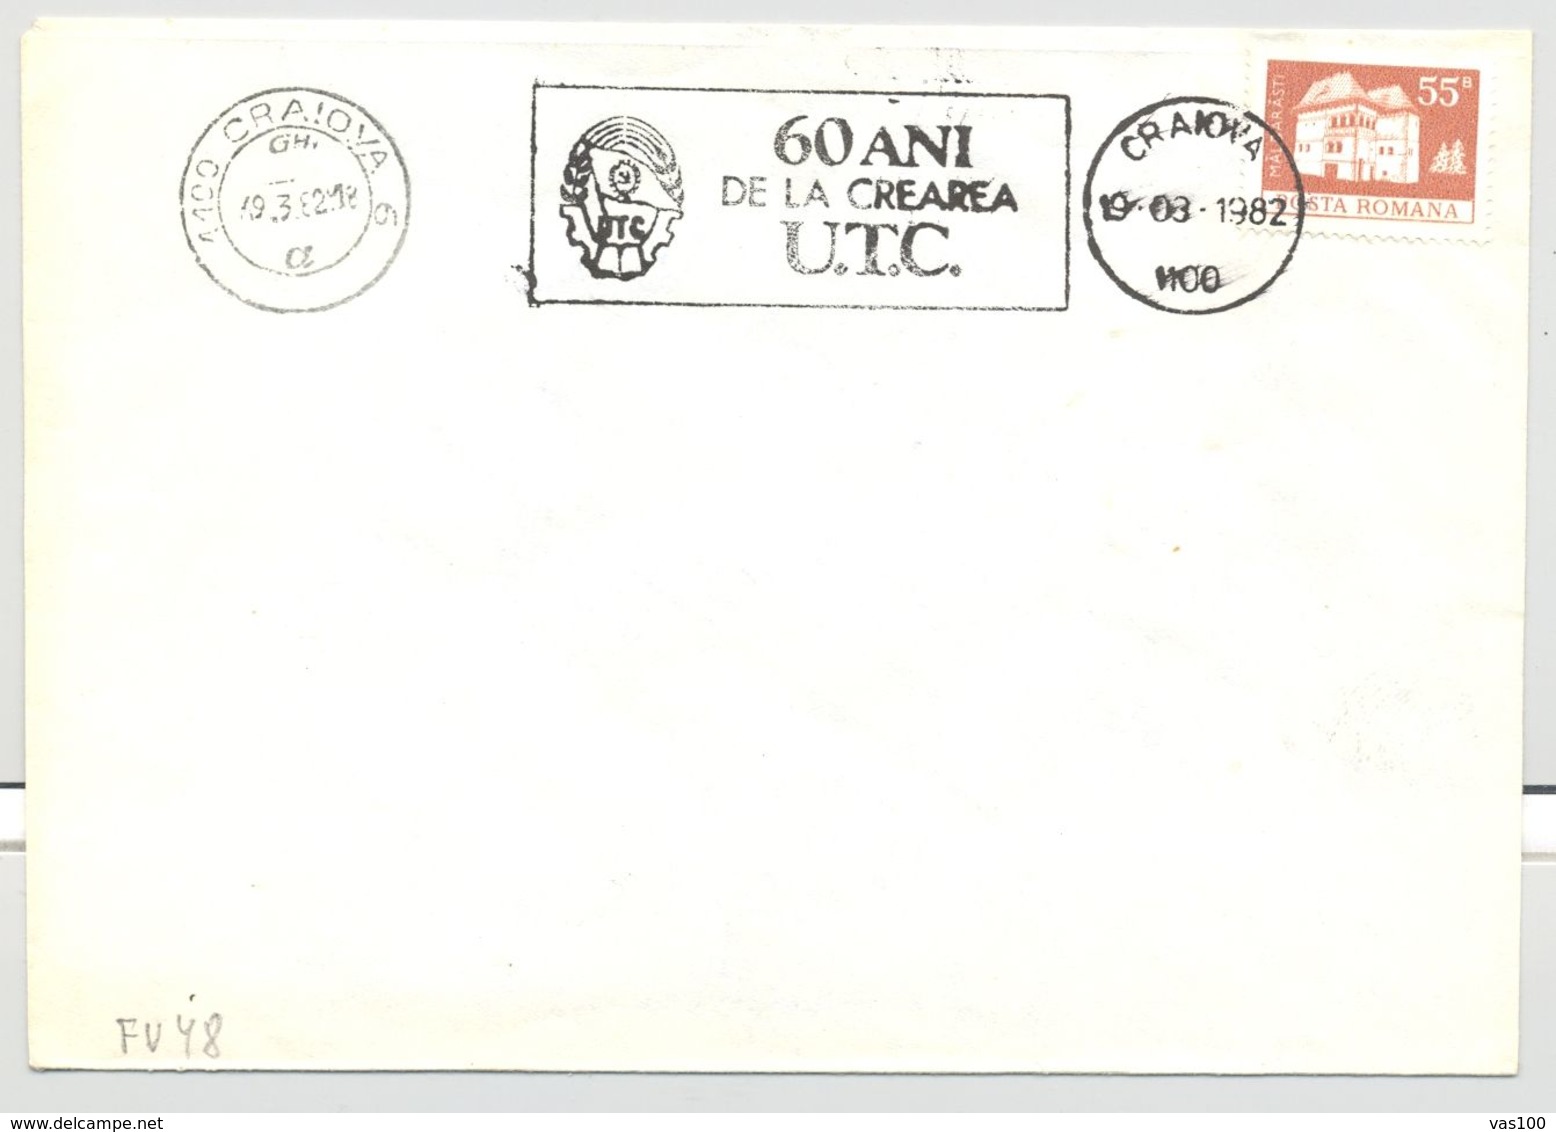 YOUTH COMMUNIST ORGANIZATION, SPECIAL POSTMARK, MANSION STAMP ON COVER, 1982, ROMANIA - Lettres & Documents